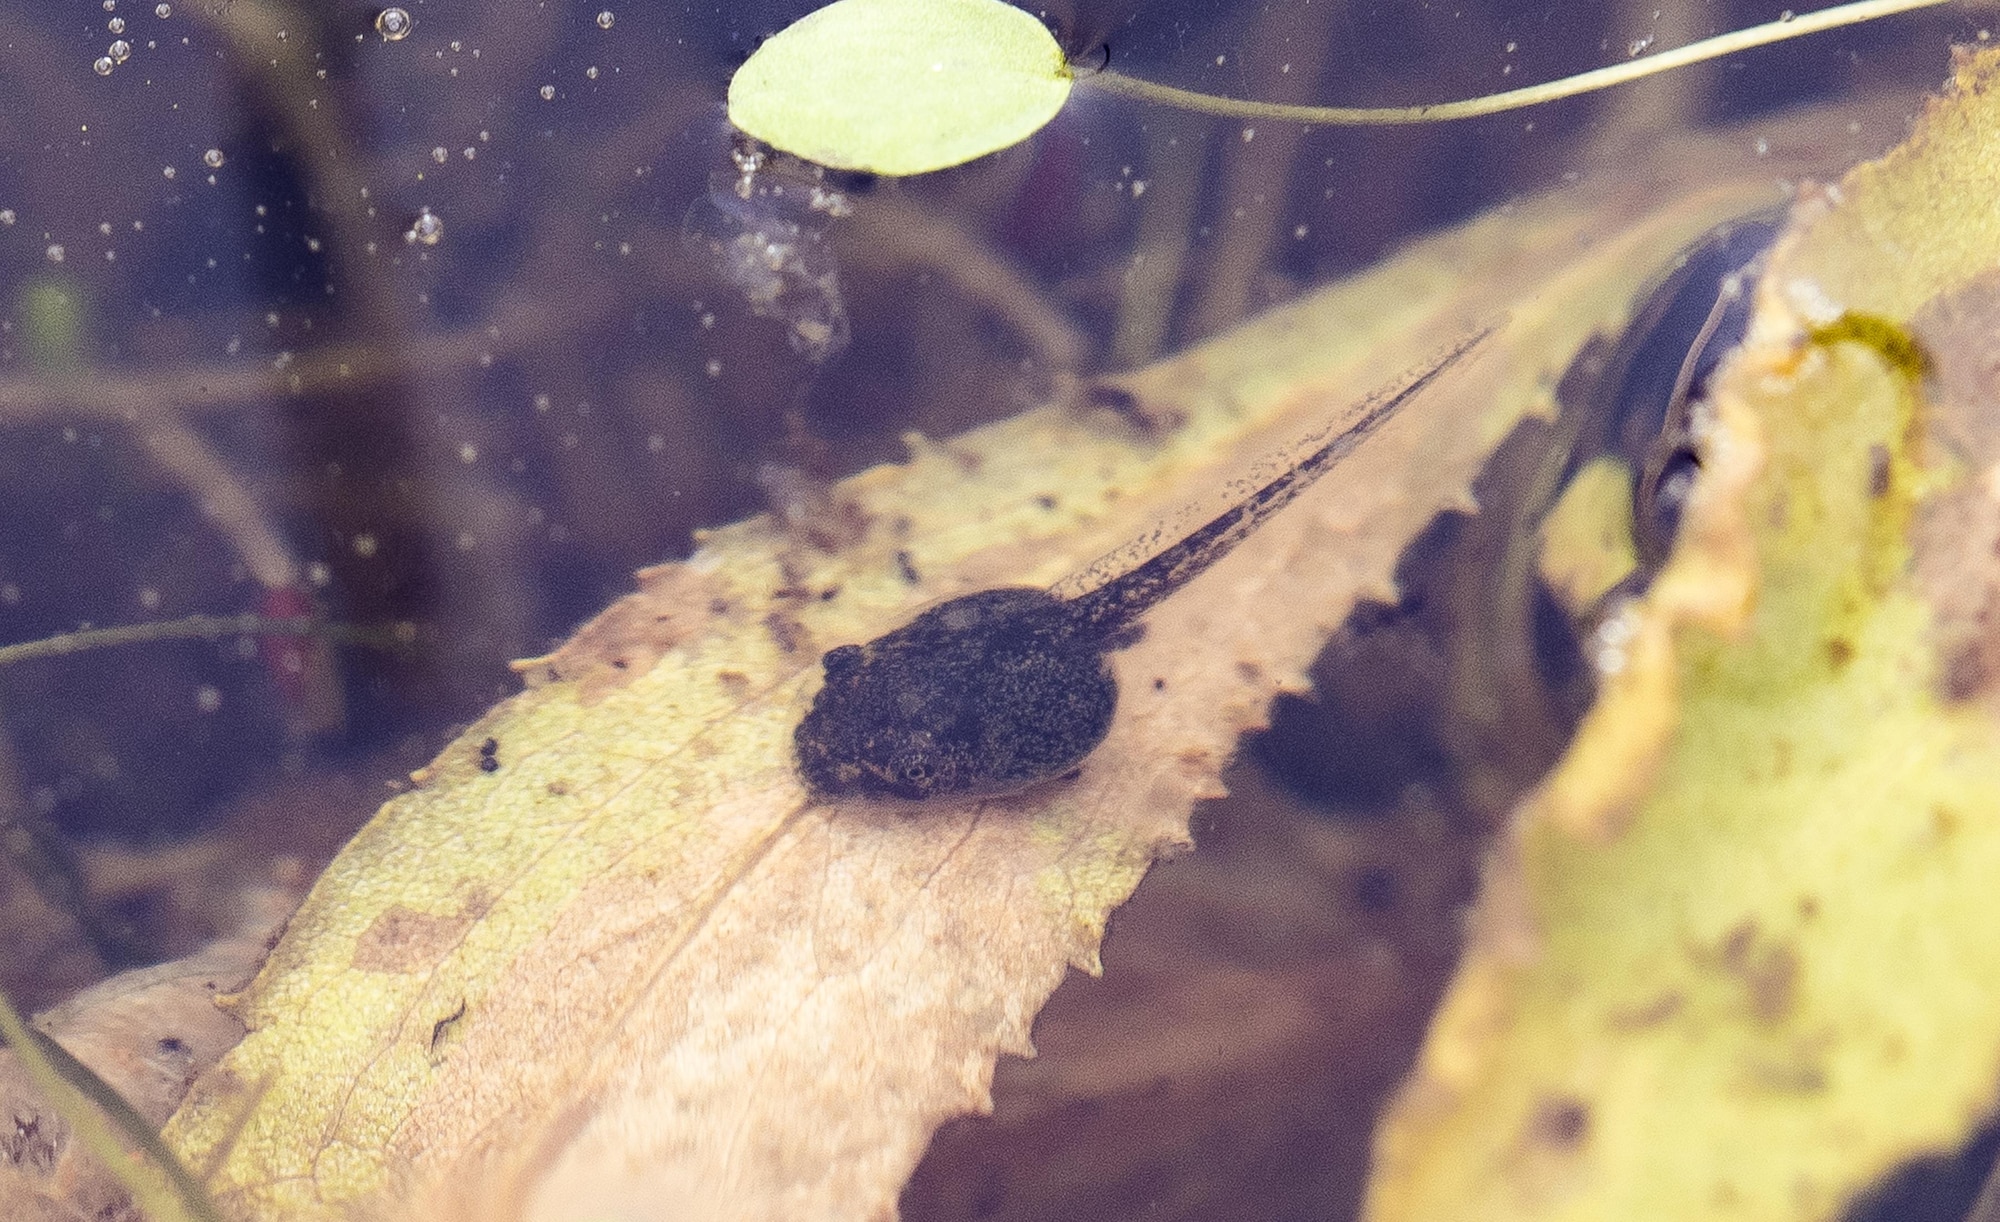 A pacific chorus frog tadpole spends the first part of its life in an ephemeral vernal pool Feb. 13, 2017 at Travis Air Force Base, Calif. The adult frog will lay an egg mass in shallow temporary ponds which limit predators like fish and turtles. The tadpoles feed on periphyton, filamentous algae, diatoms and pollen in or on the surface of the water. (U.S. Air Force photo/Heide Couch)